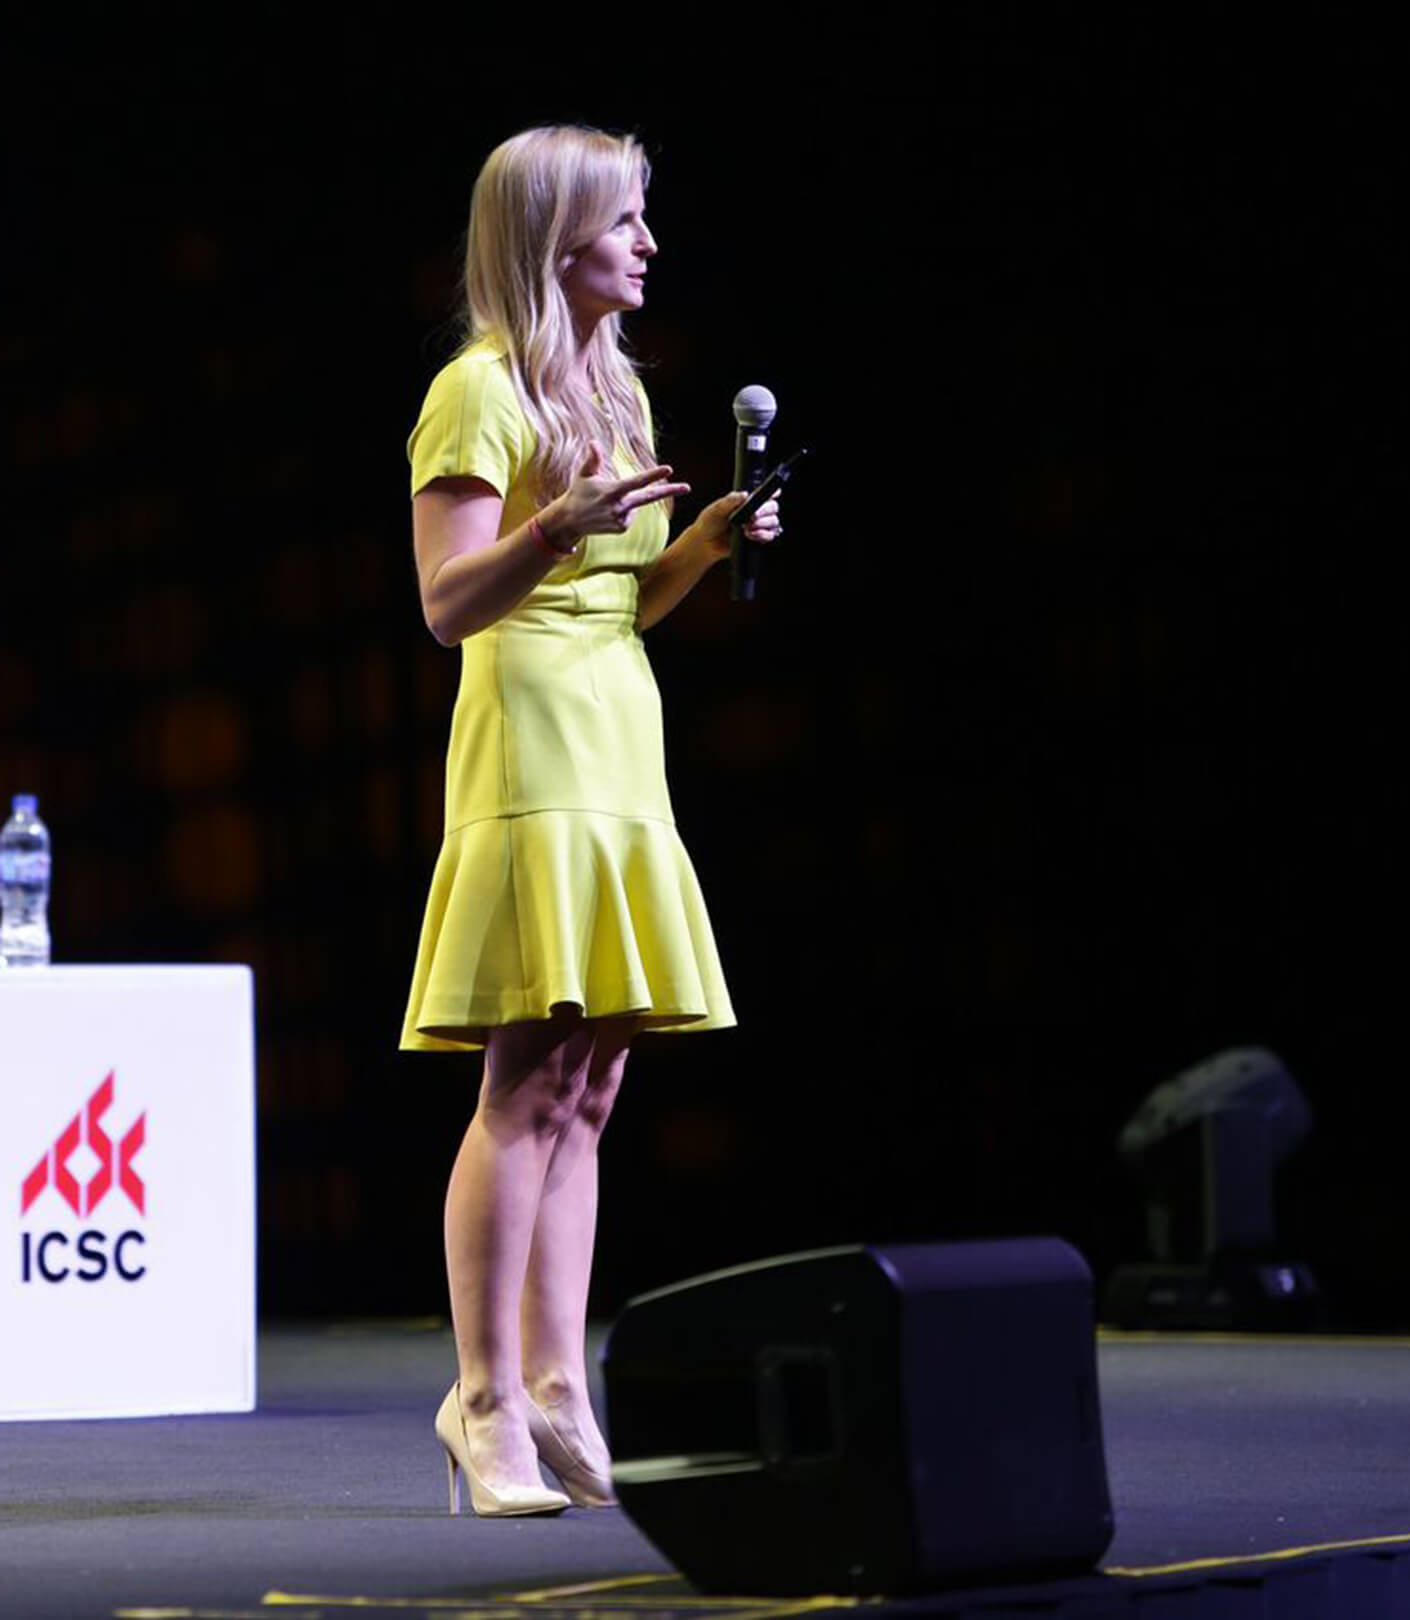 Sarah speaks on stage at a large conference